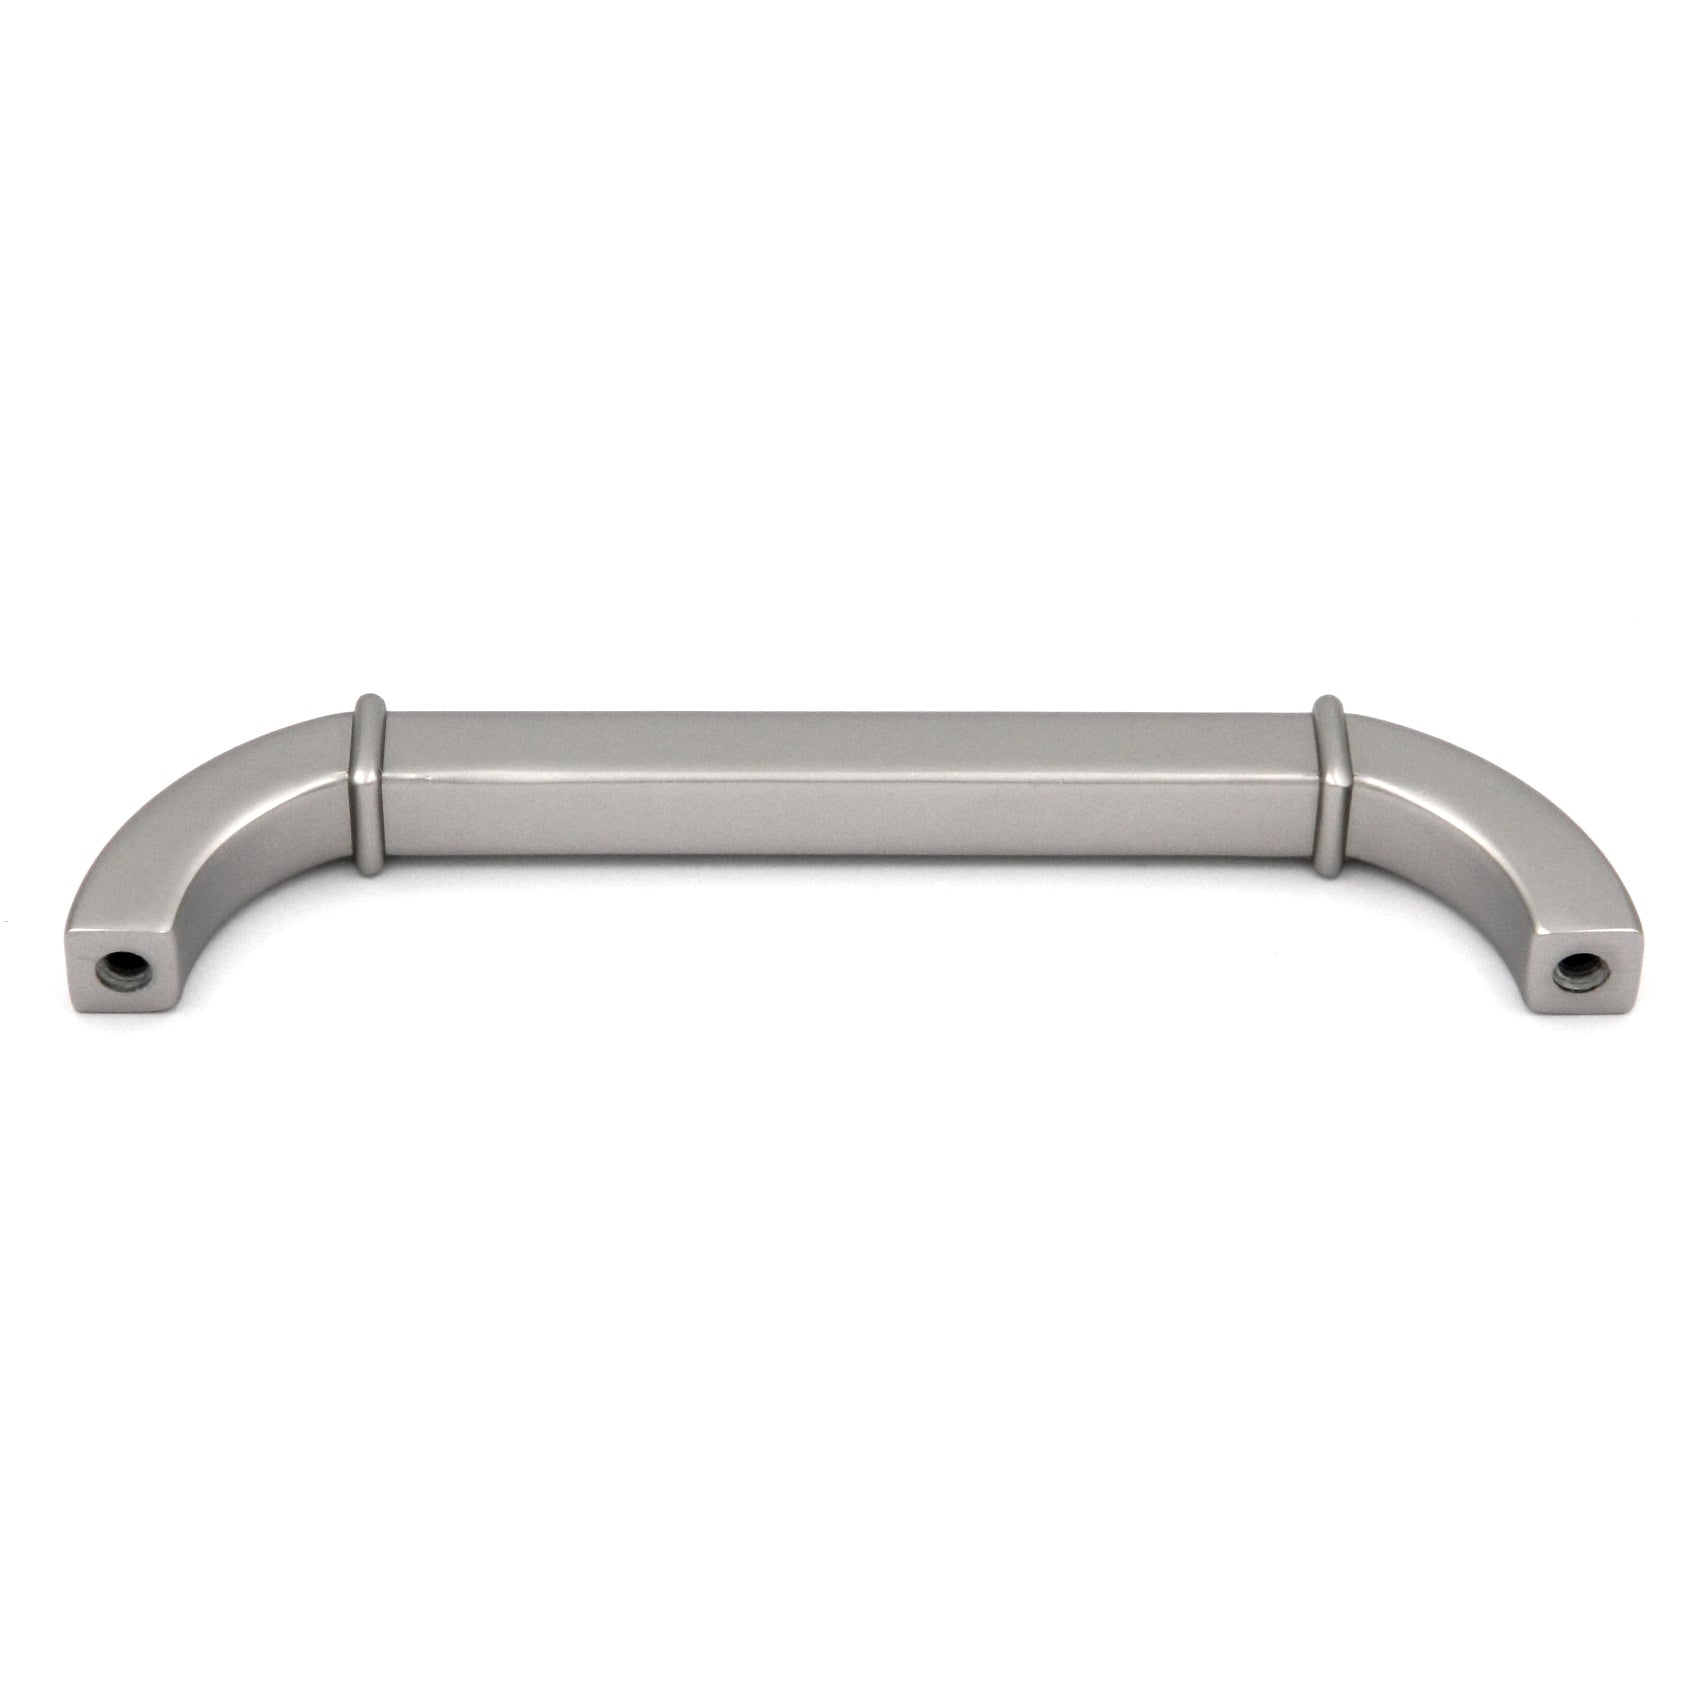 Hickory Vanguard P3082-FN Flat Nickel 5" (128mm)cc Arch Cabinet Handle Pull